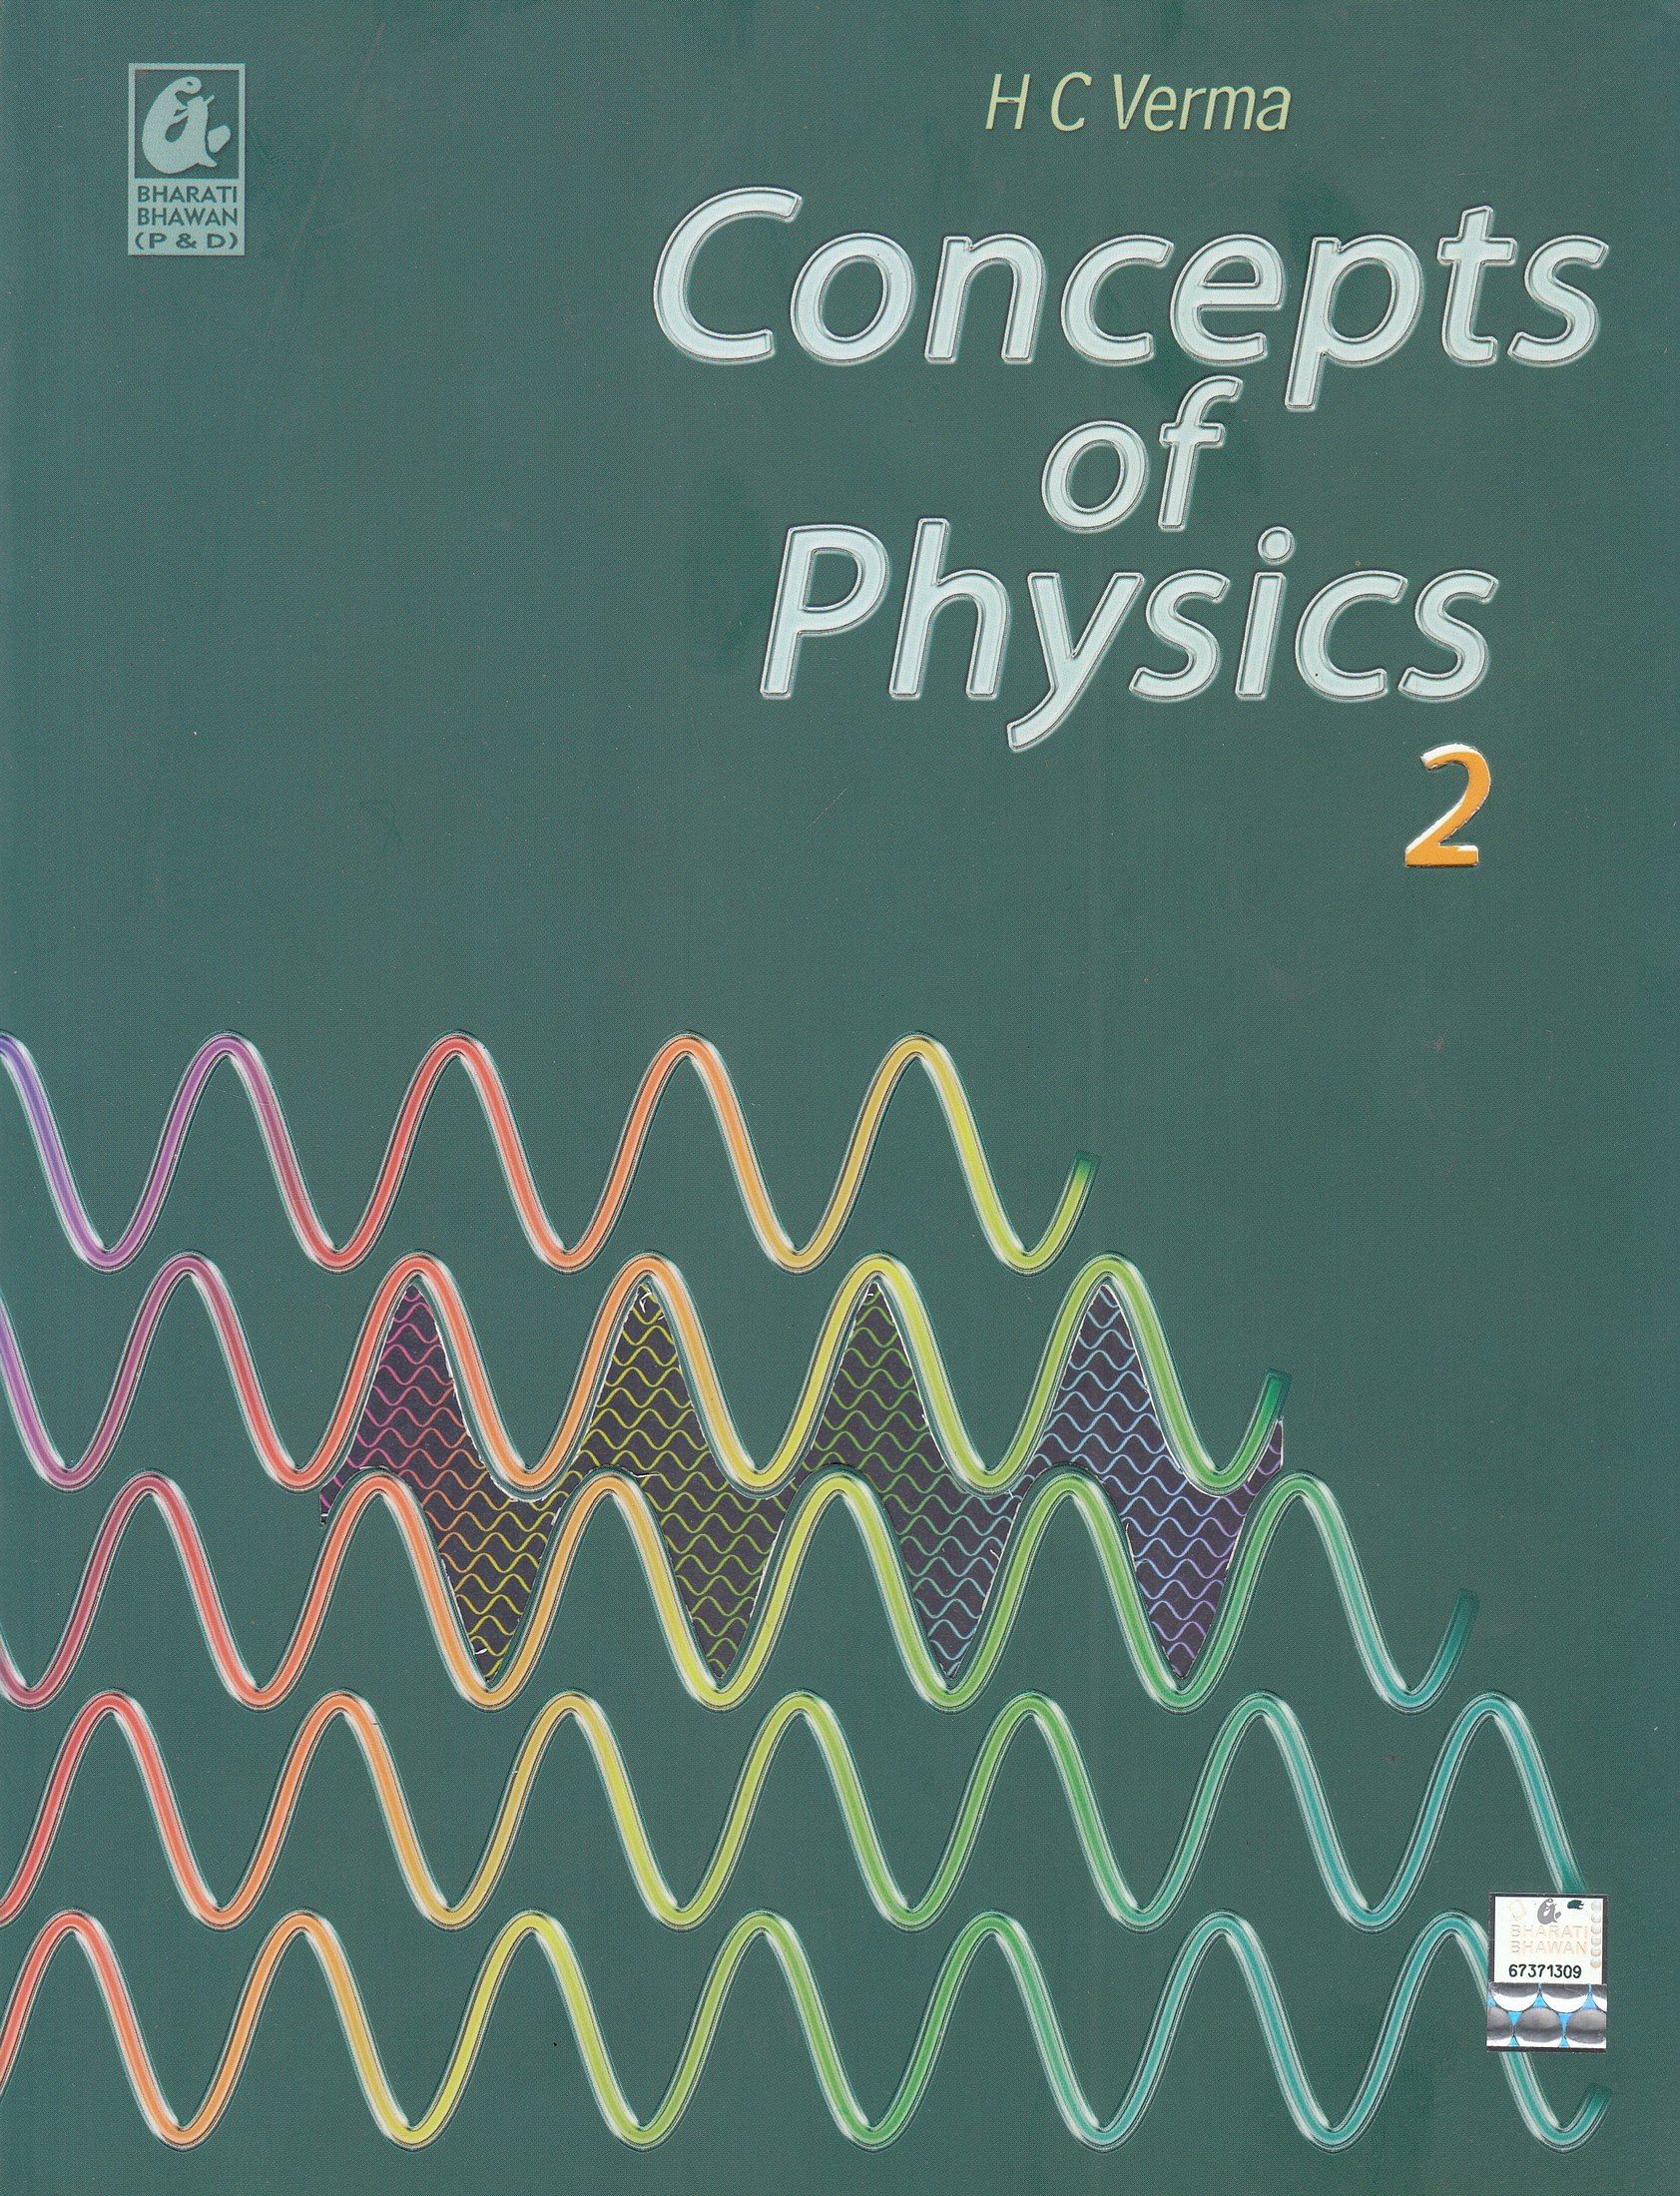 Concepts of Physics Volume II by H.C. Verma